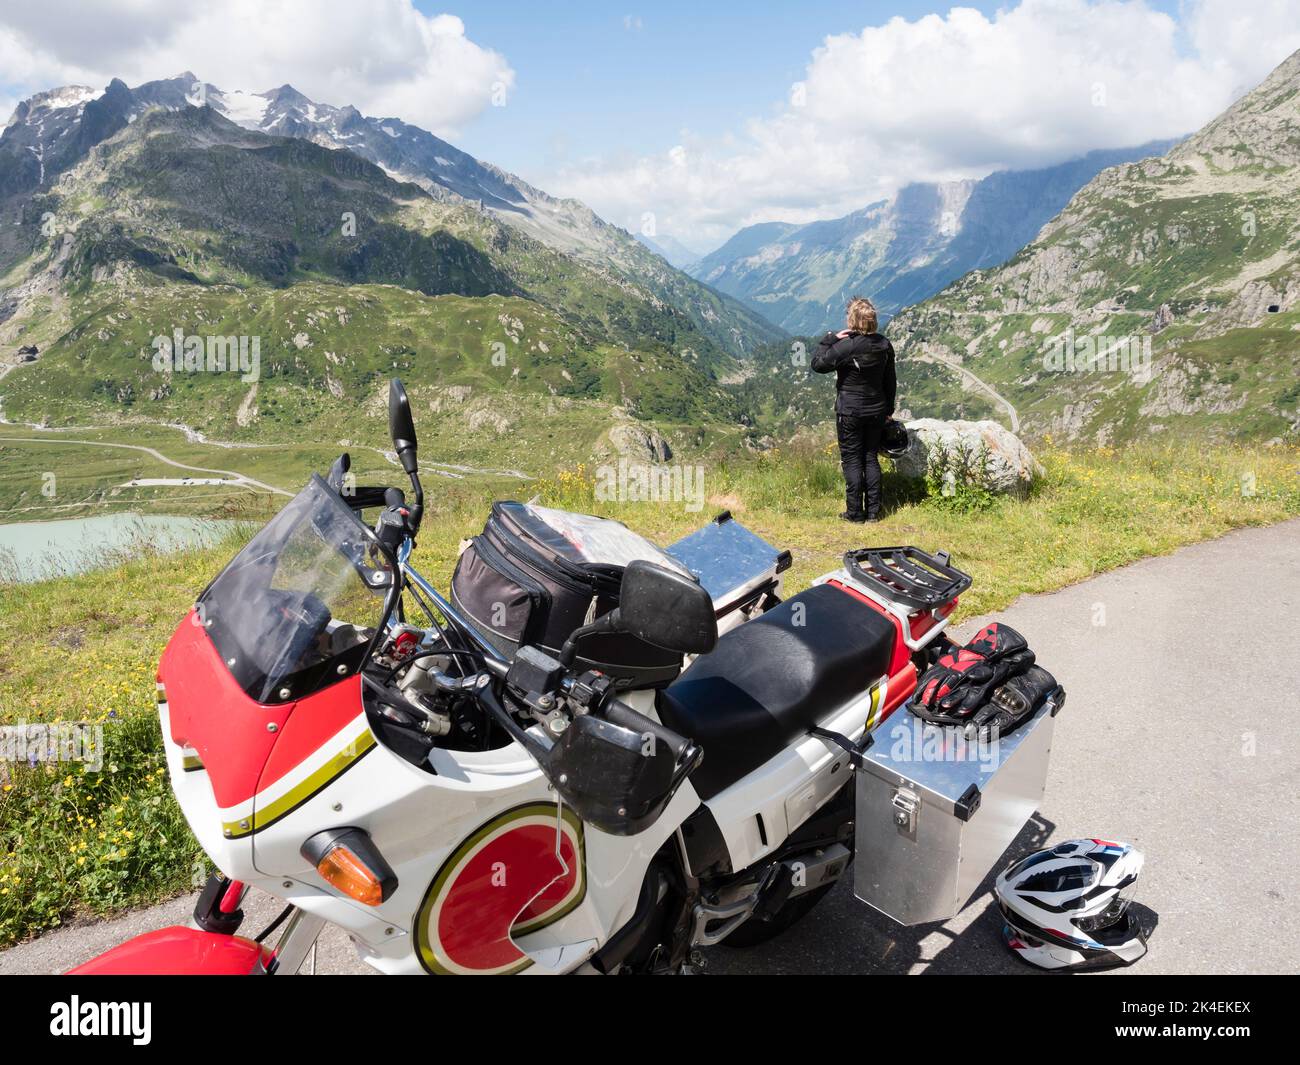 An adventure motorcycle rider is taking a break at a mountain pass in the Swiss alps. Stock Photo